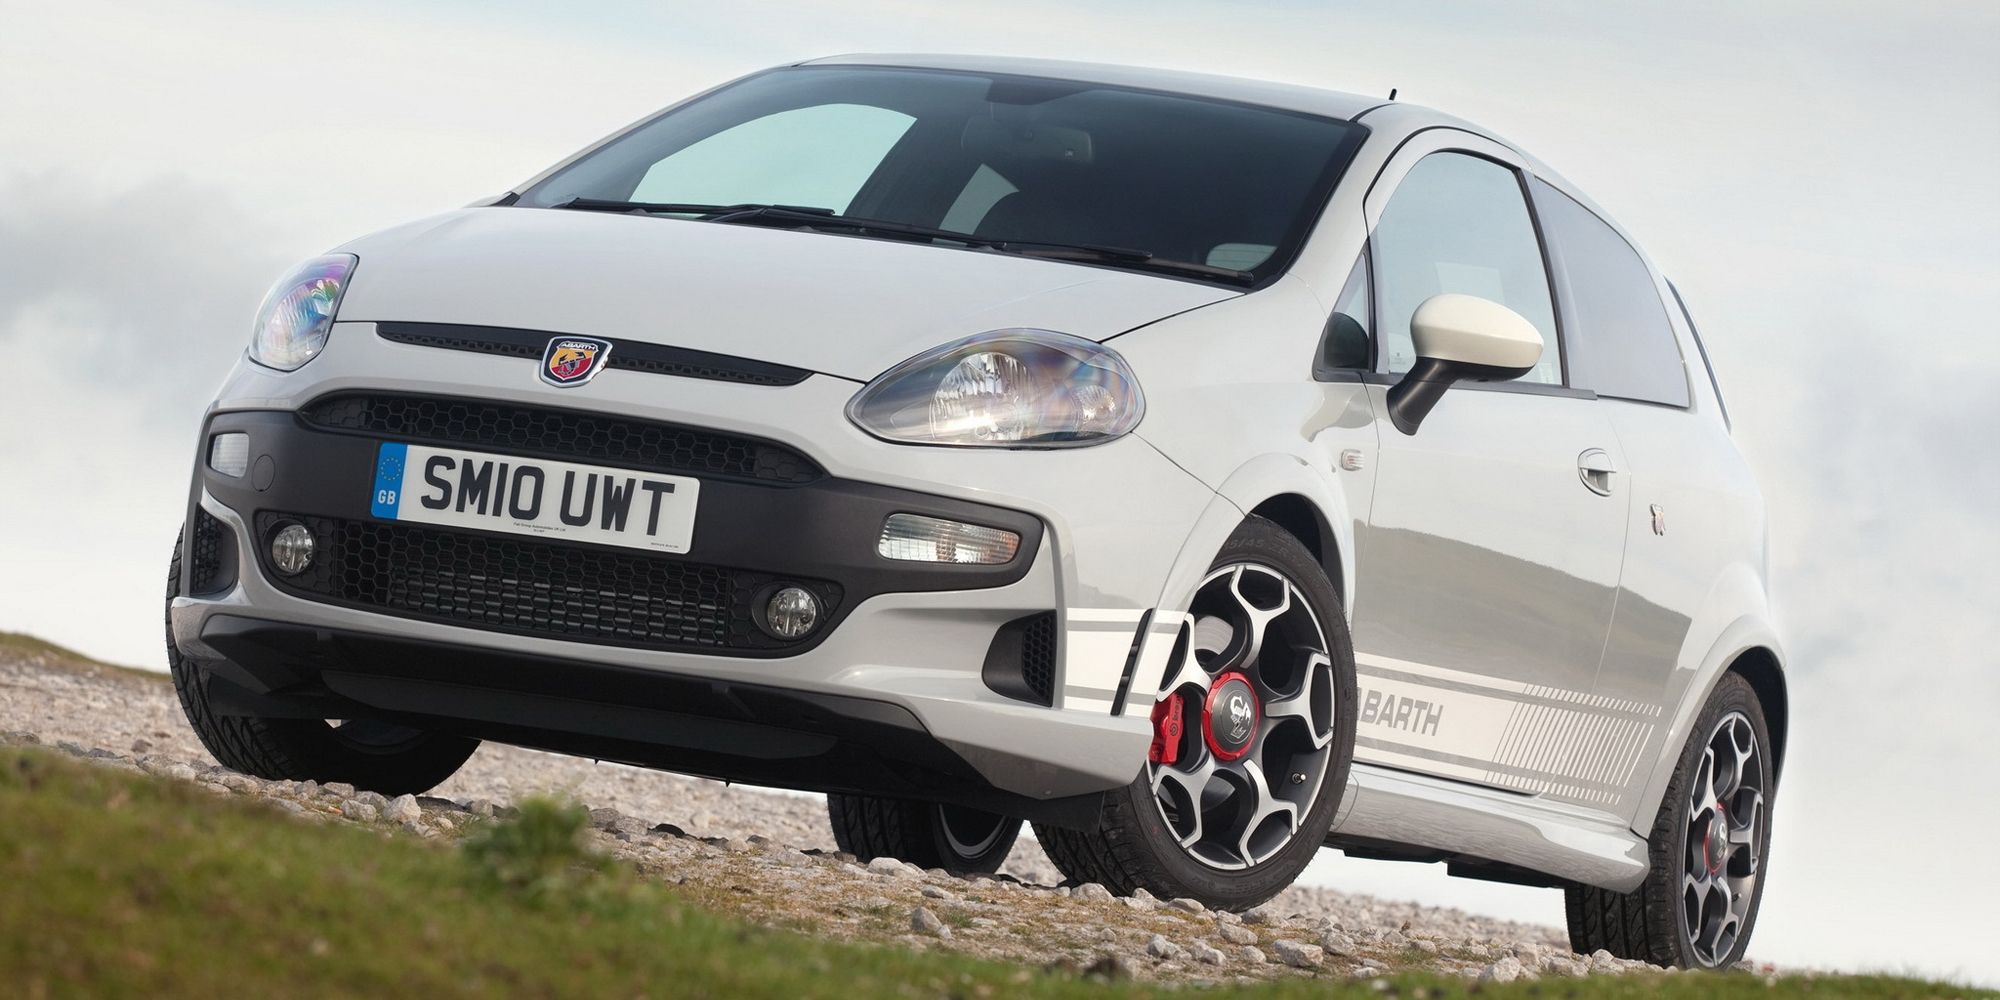 The front of the Abarth Punto Evo